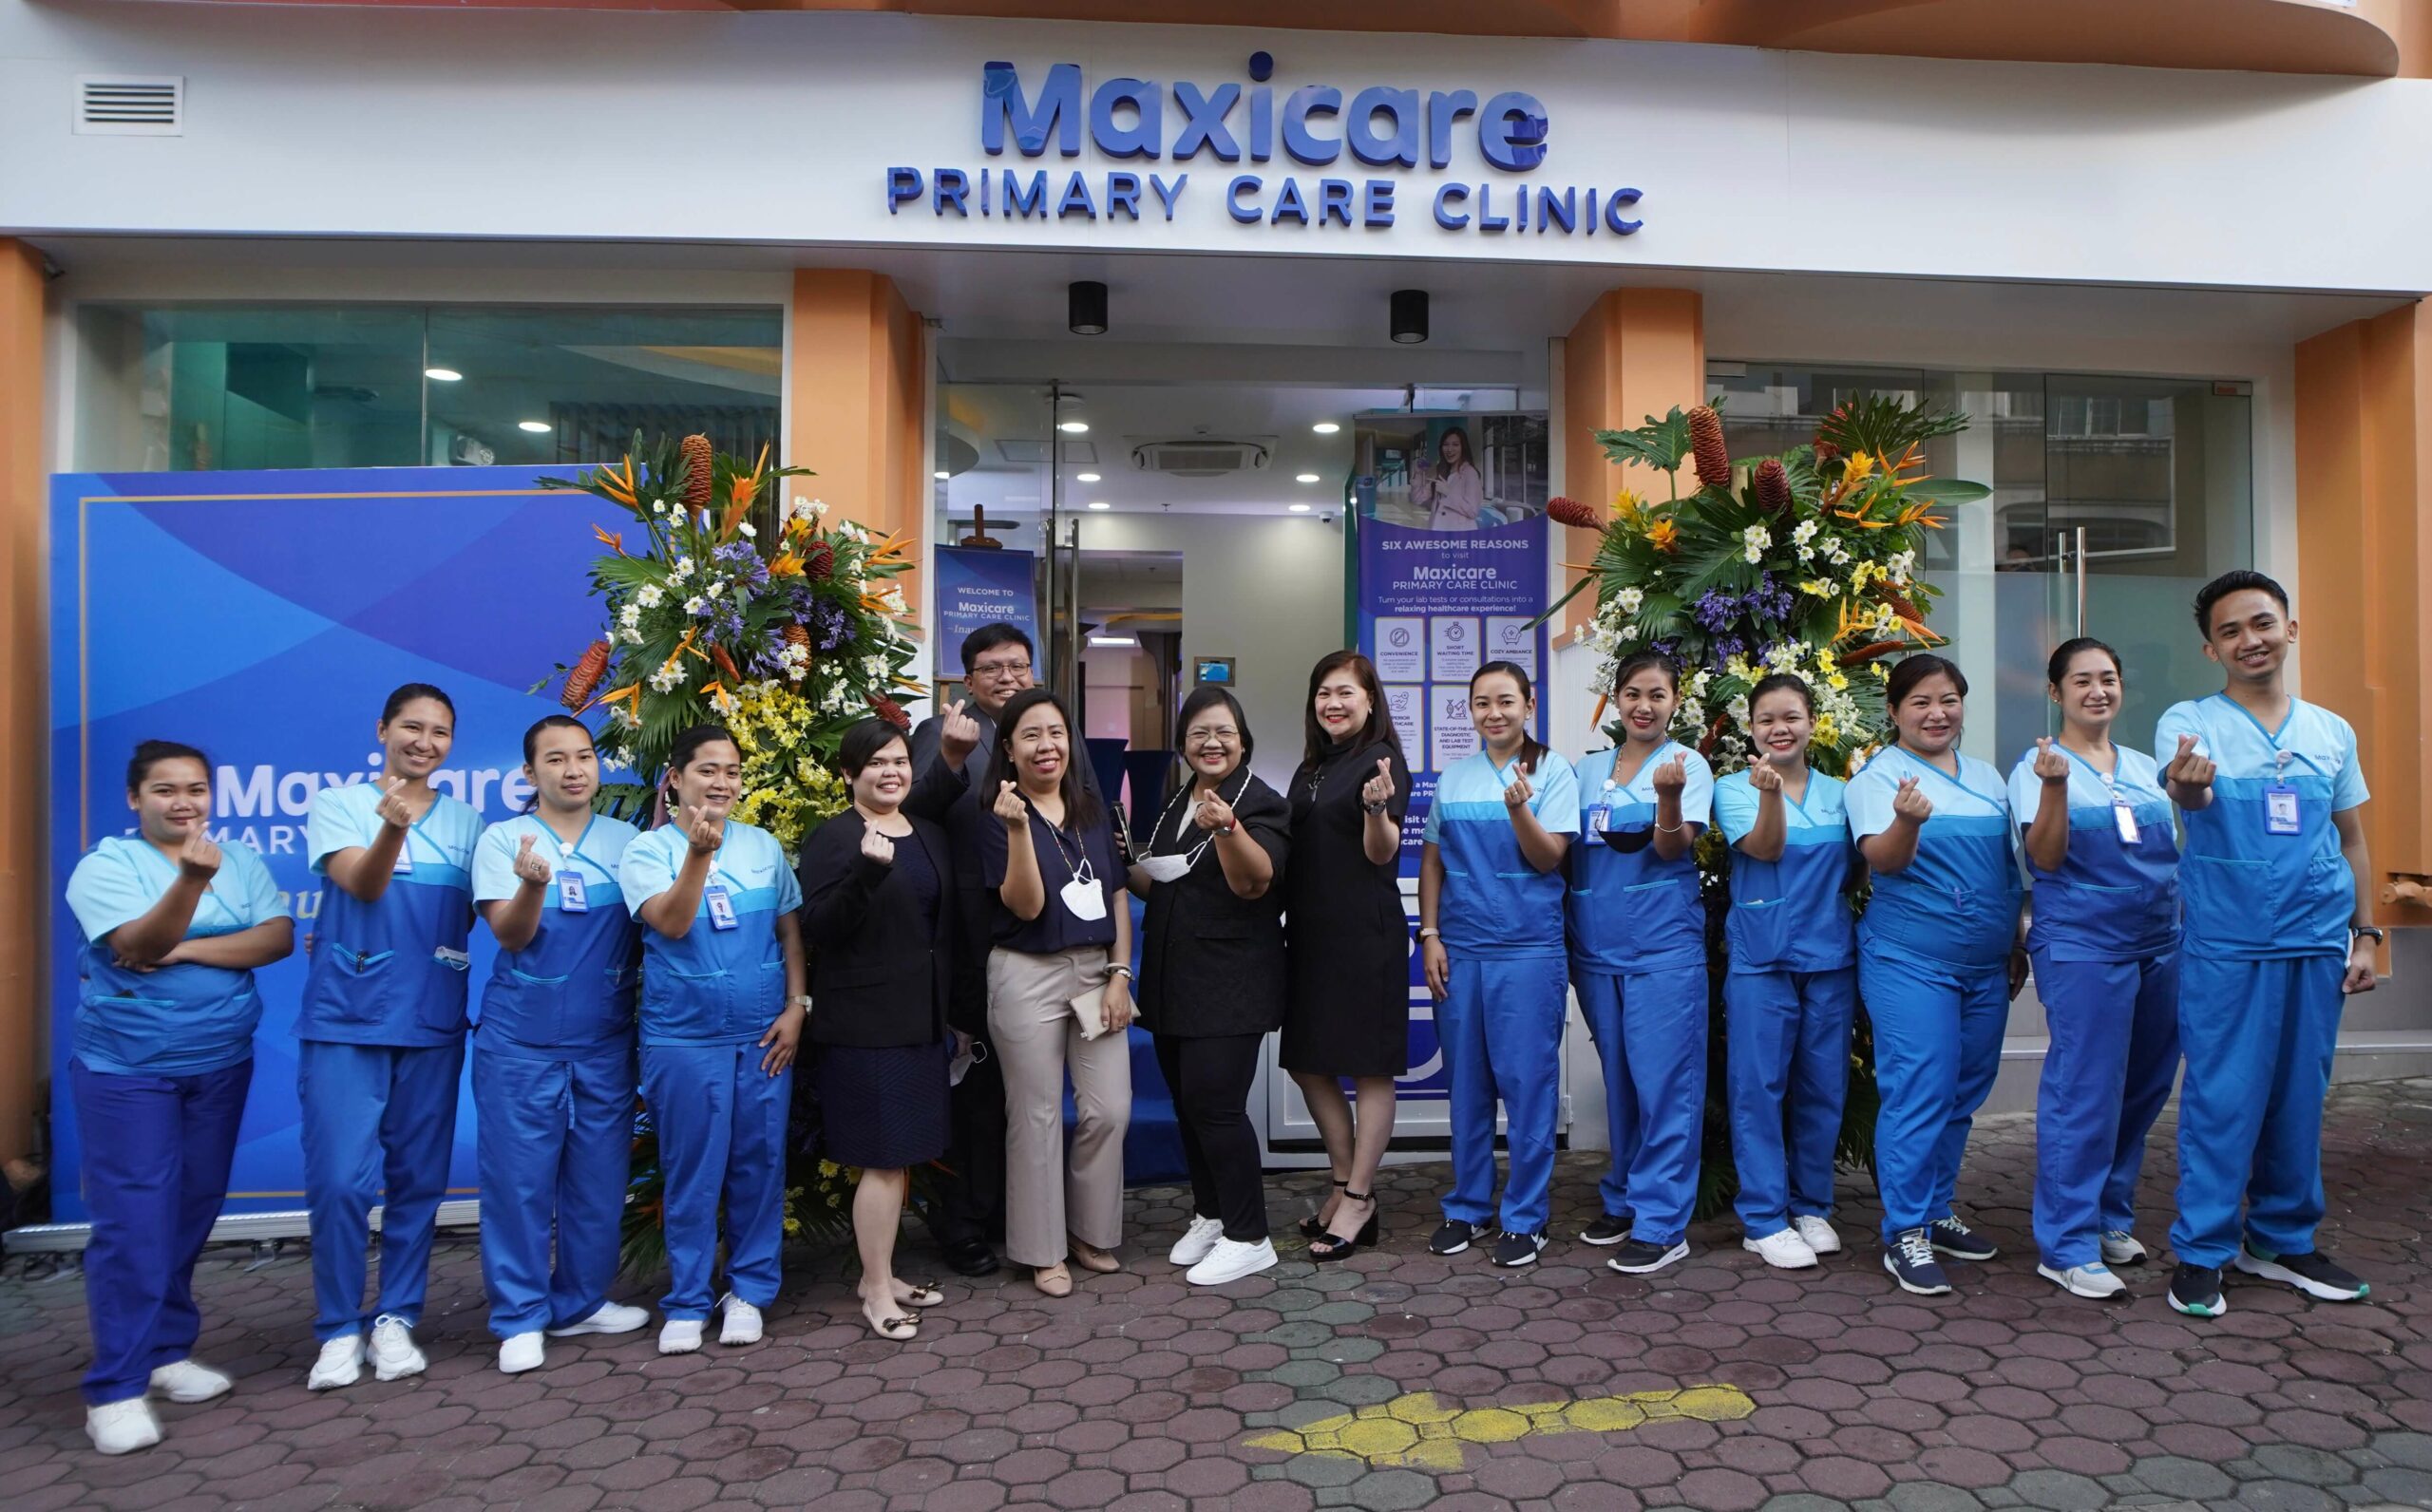 Staff at Maxicare Primary Care Clinic